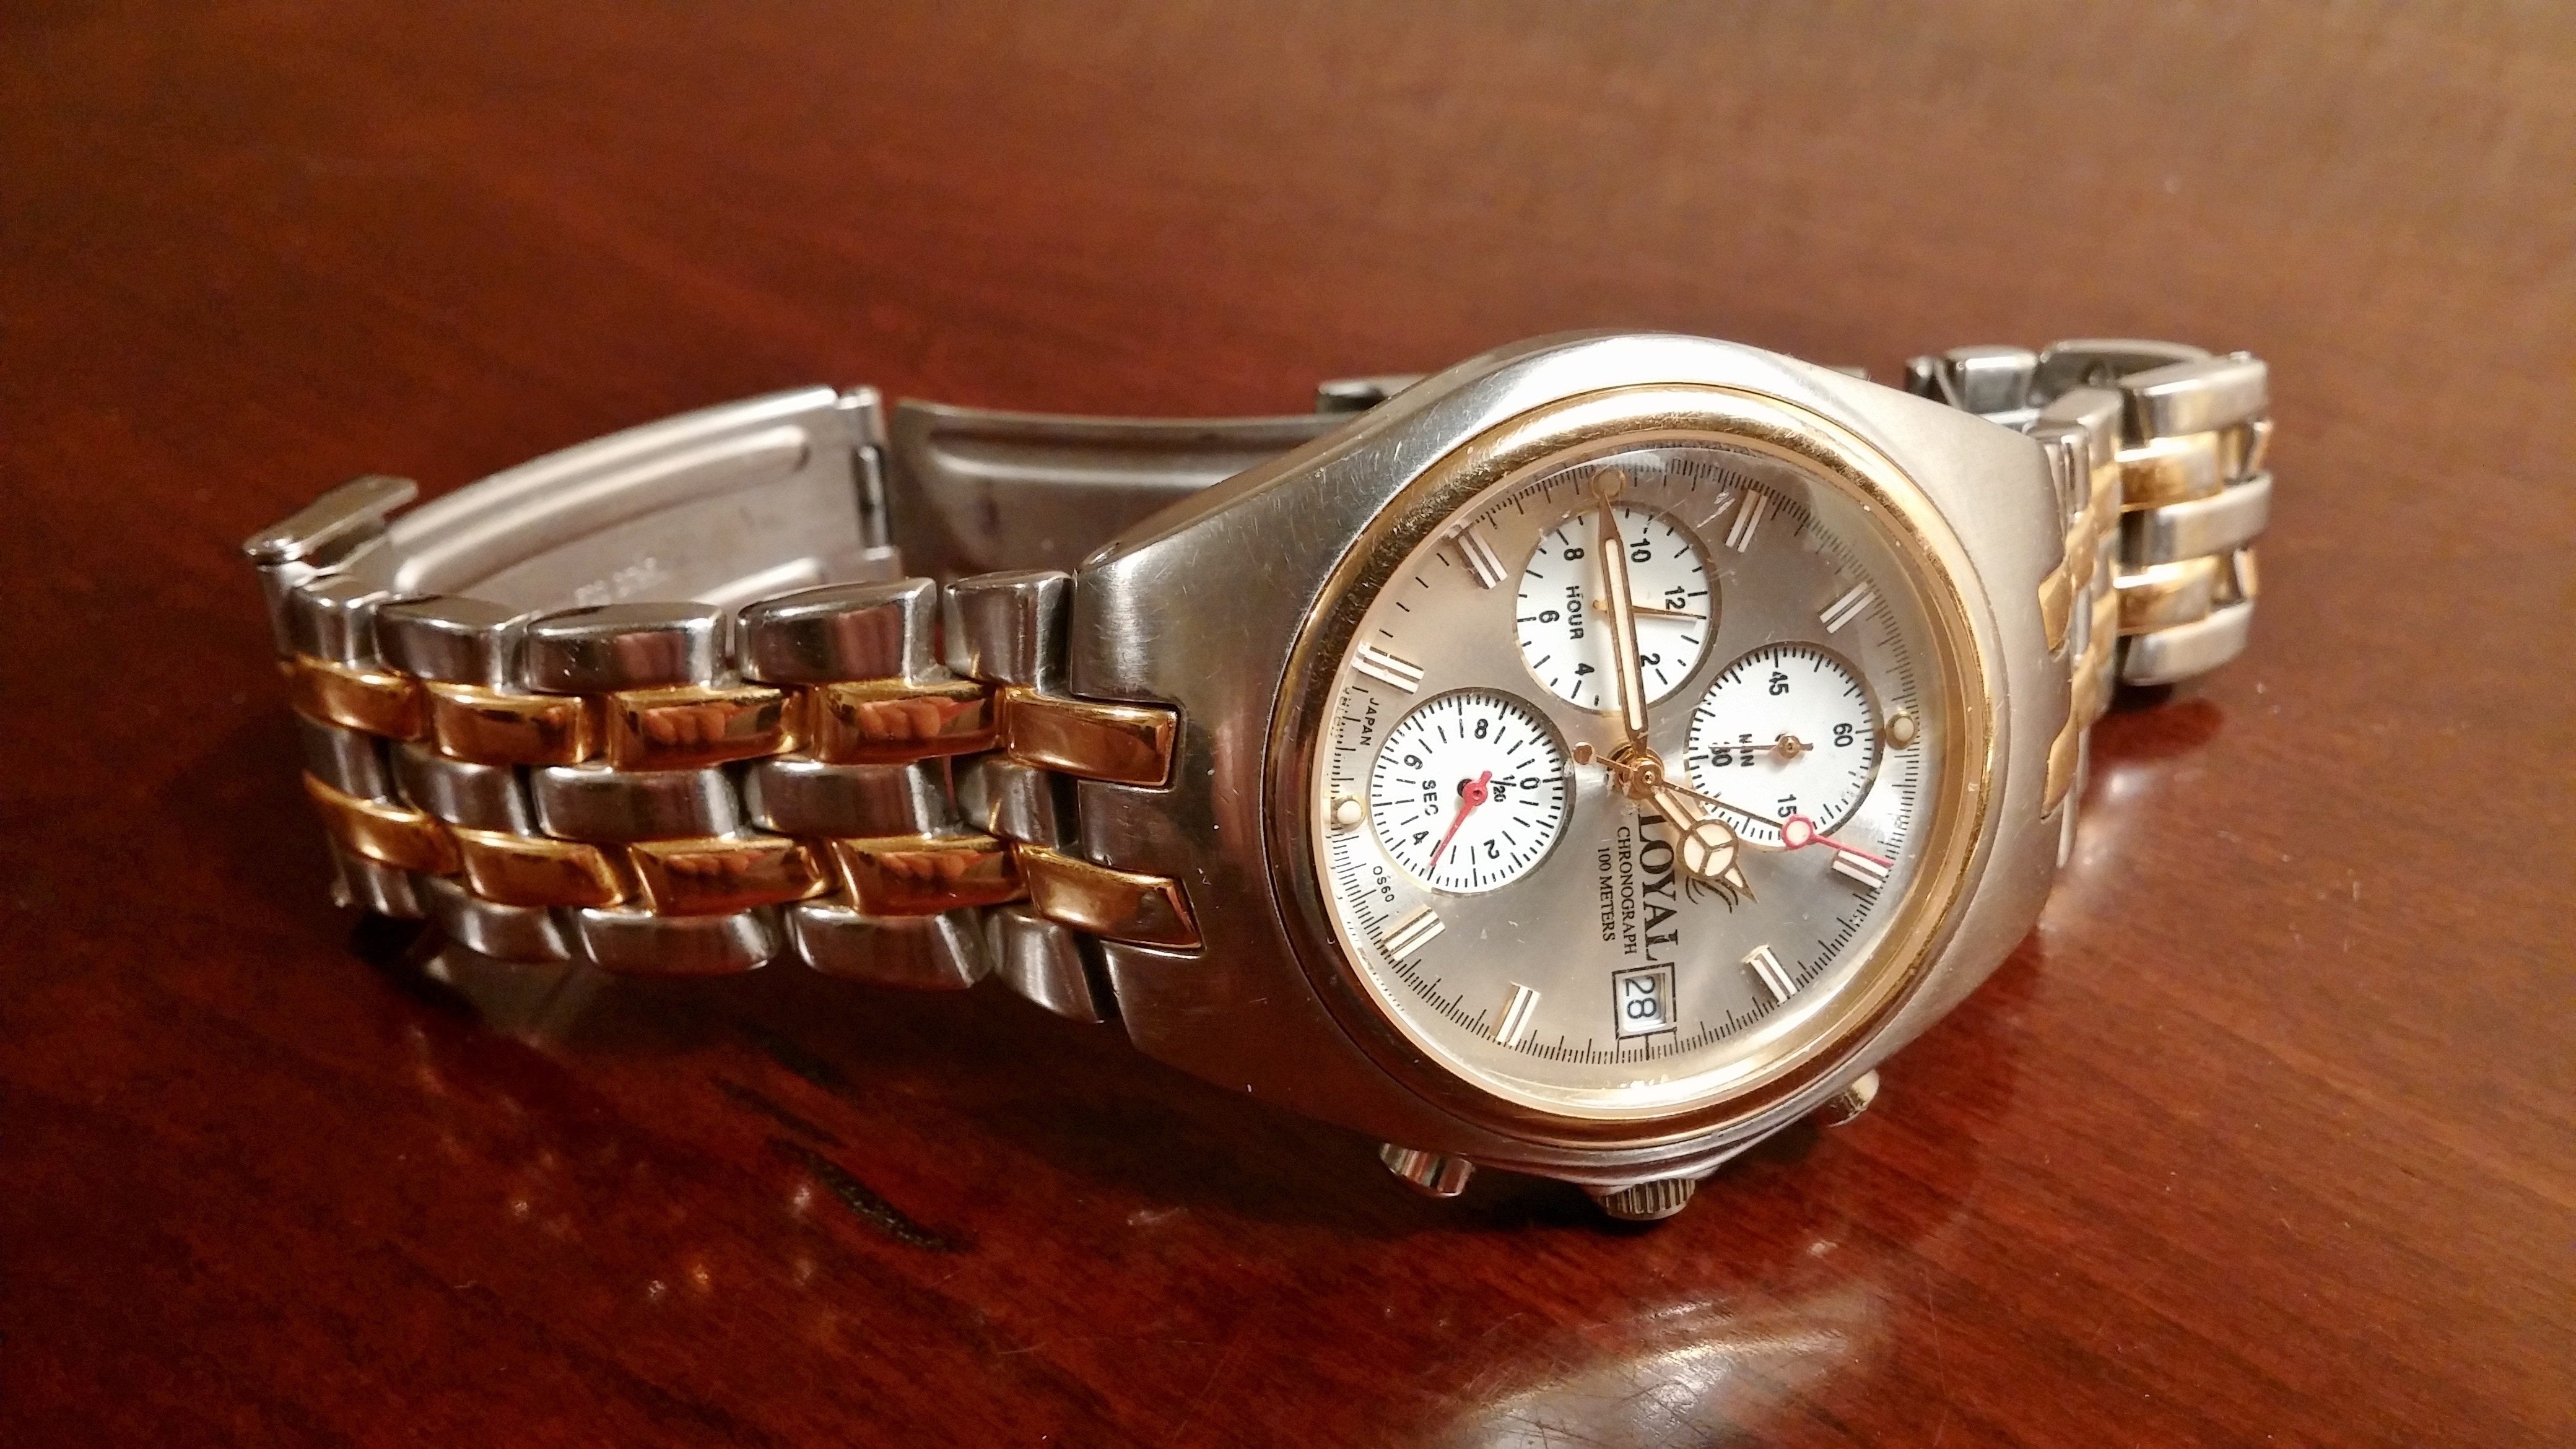 gold and silver link bracelet chronograph watch